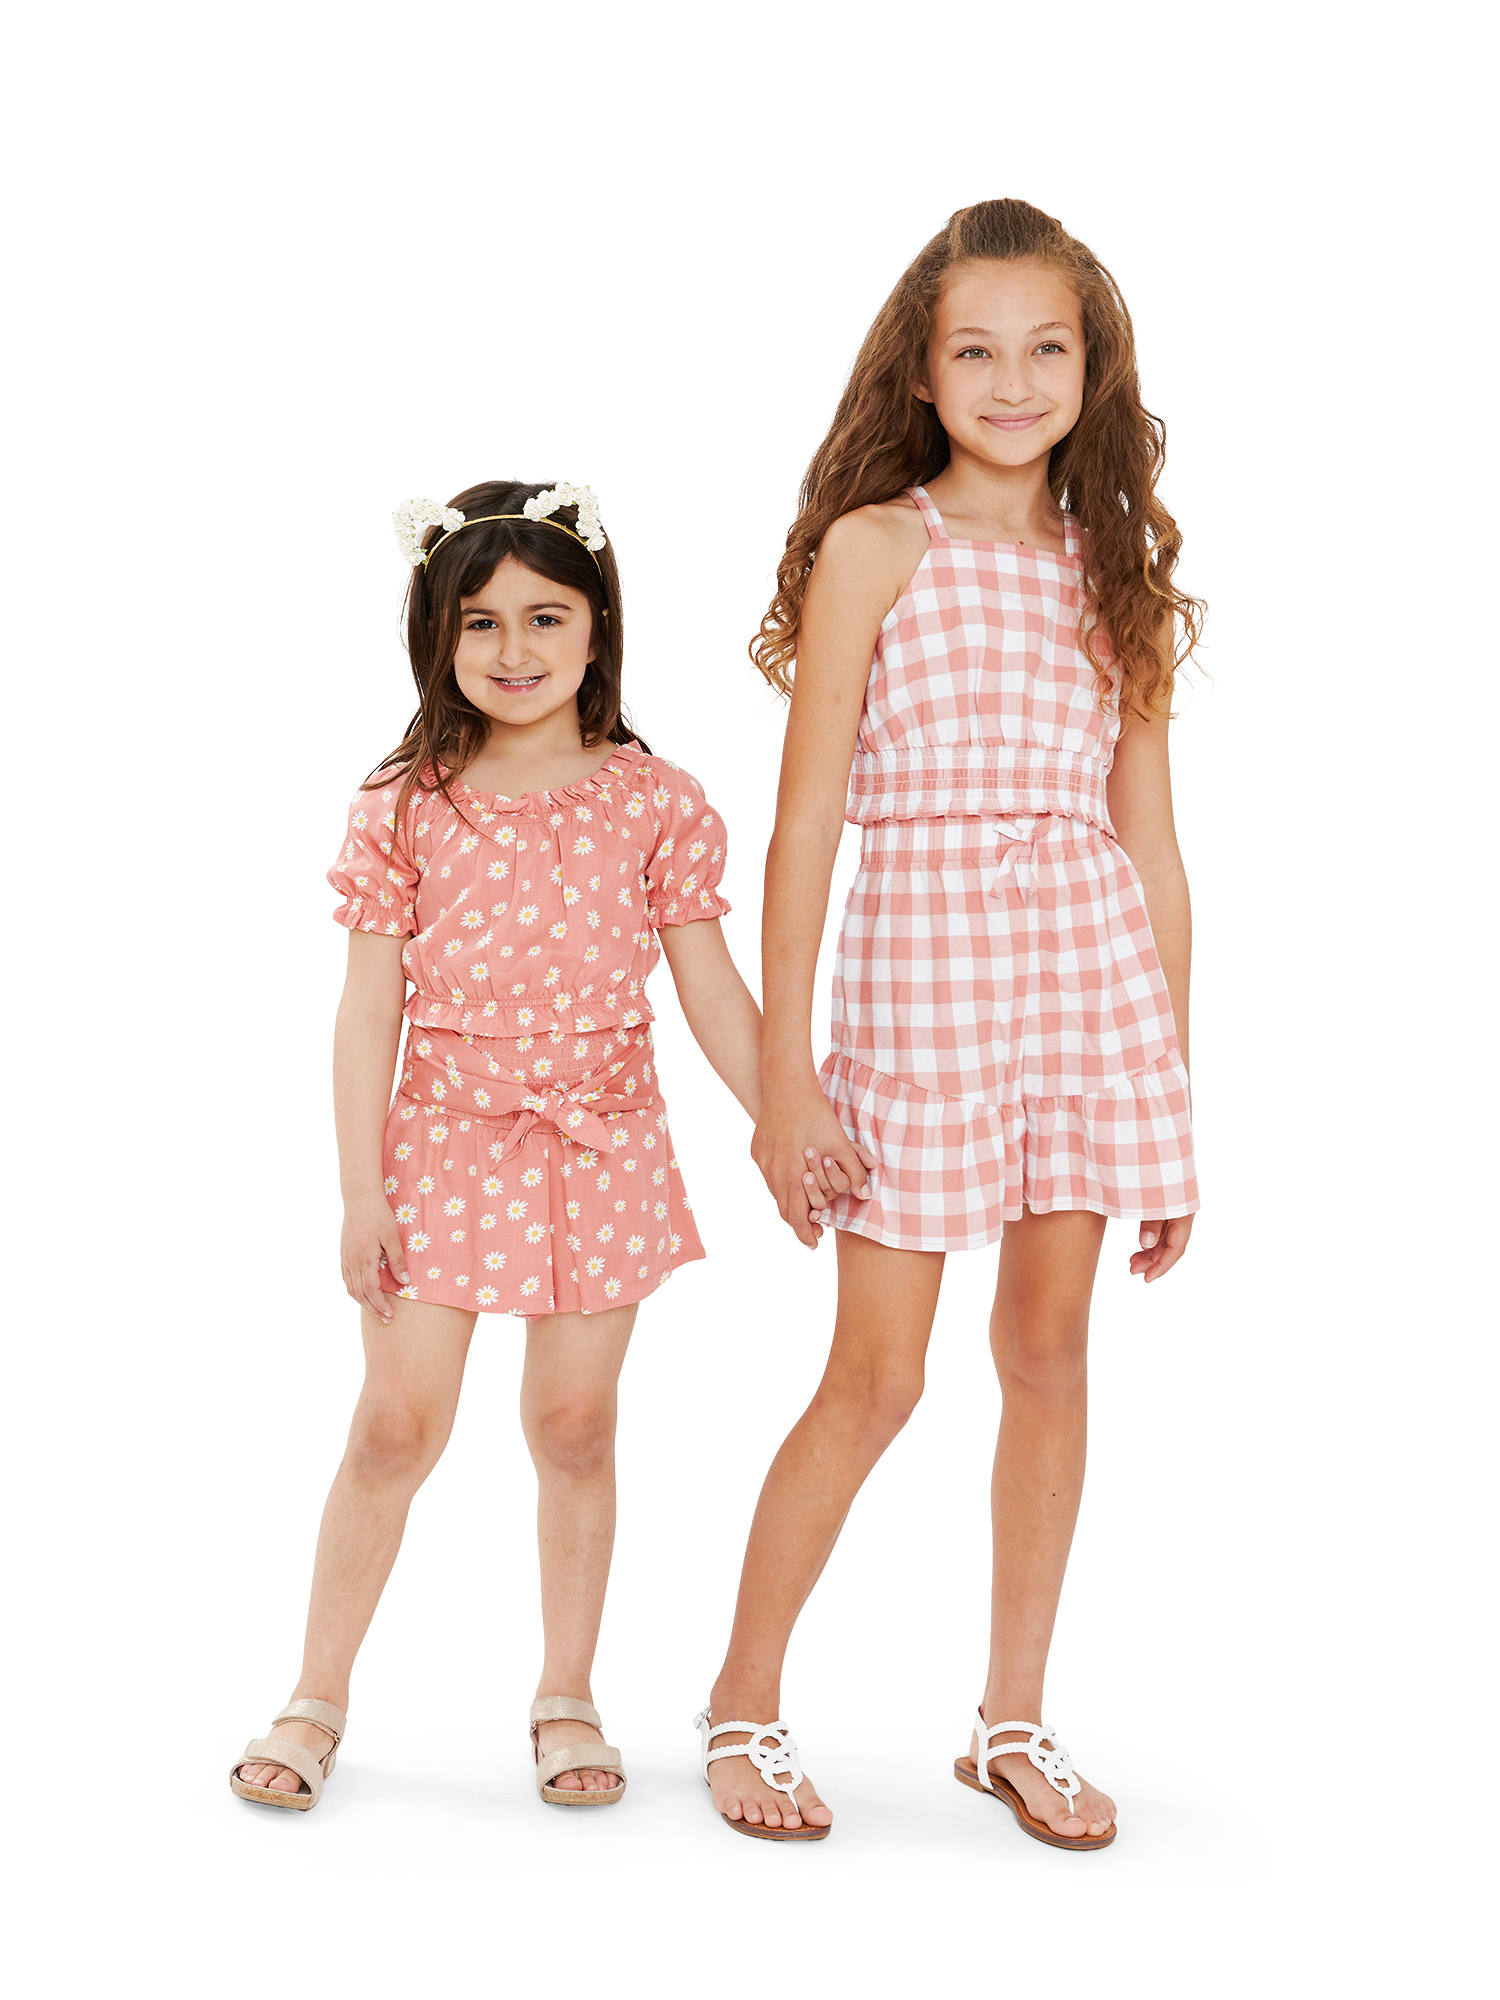 Wonder Nation Girls Gingham Tank Top and Shorts, 2-Piece Casual Outfit Set, Sizes 4-18 & Plus - image 4 of 6